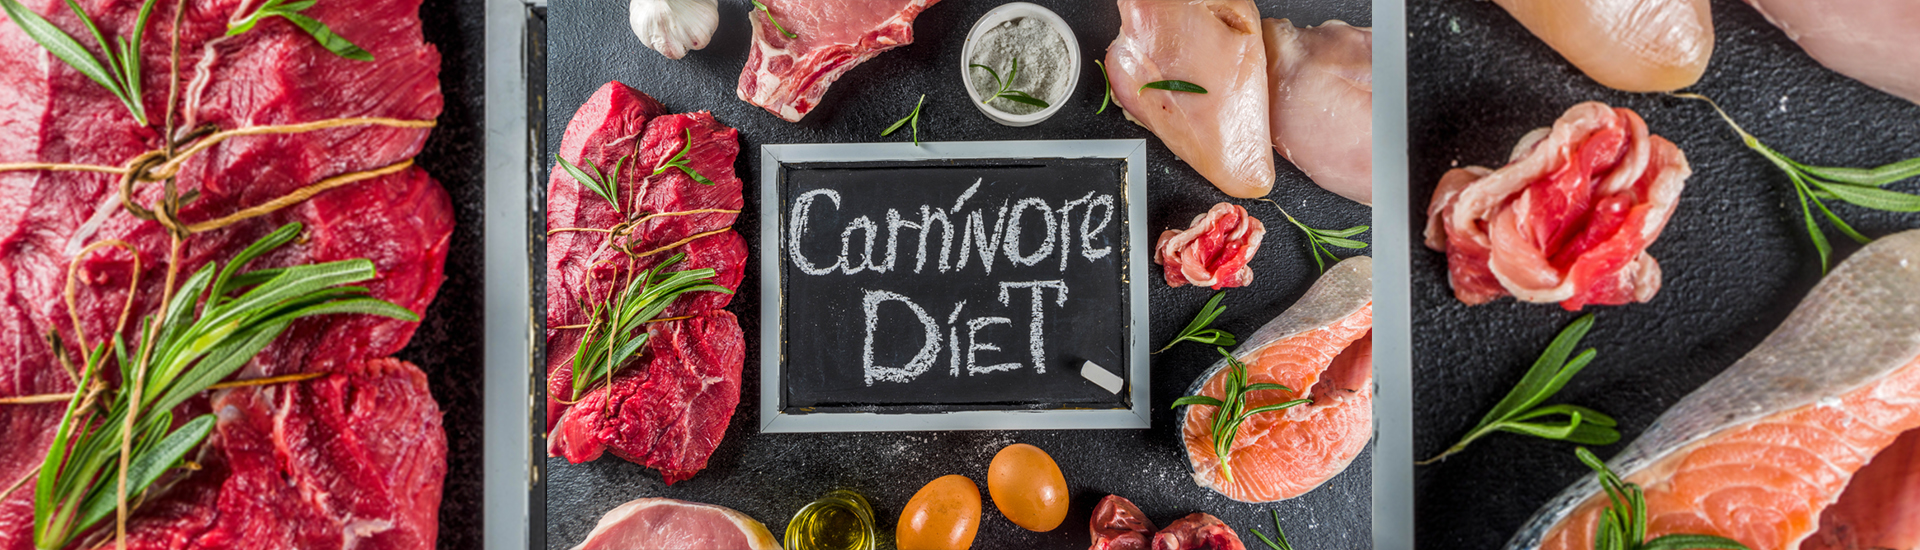 Is the Carnivore Diet Worth the Hype?